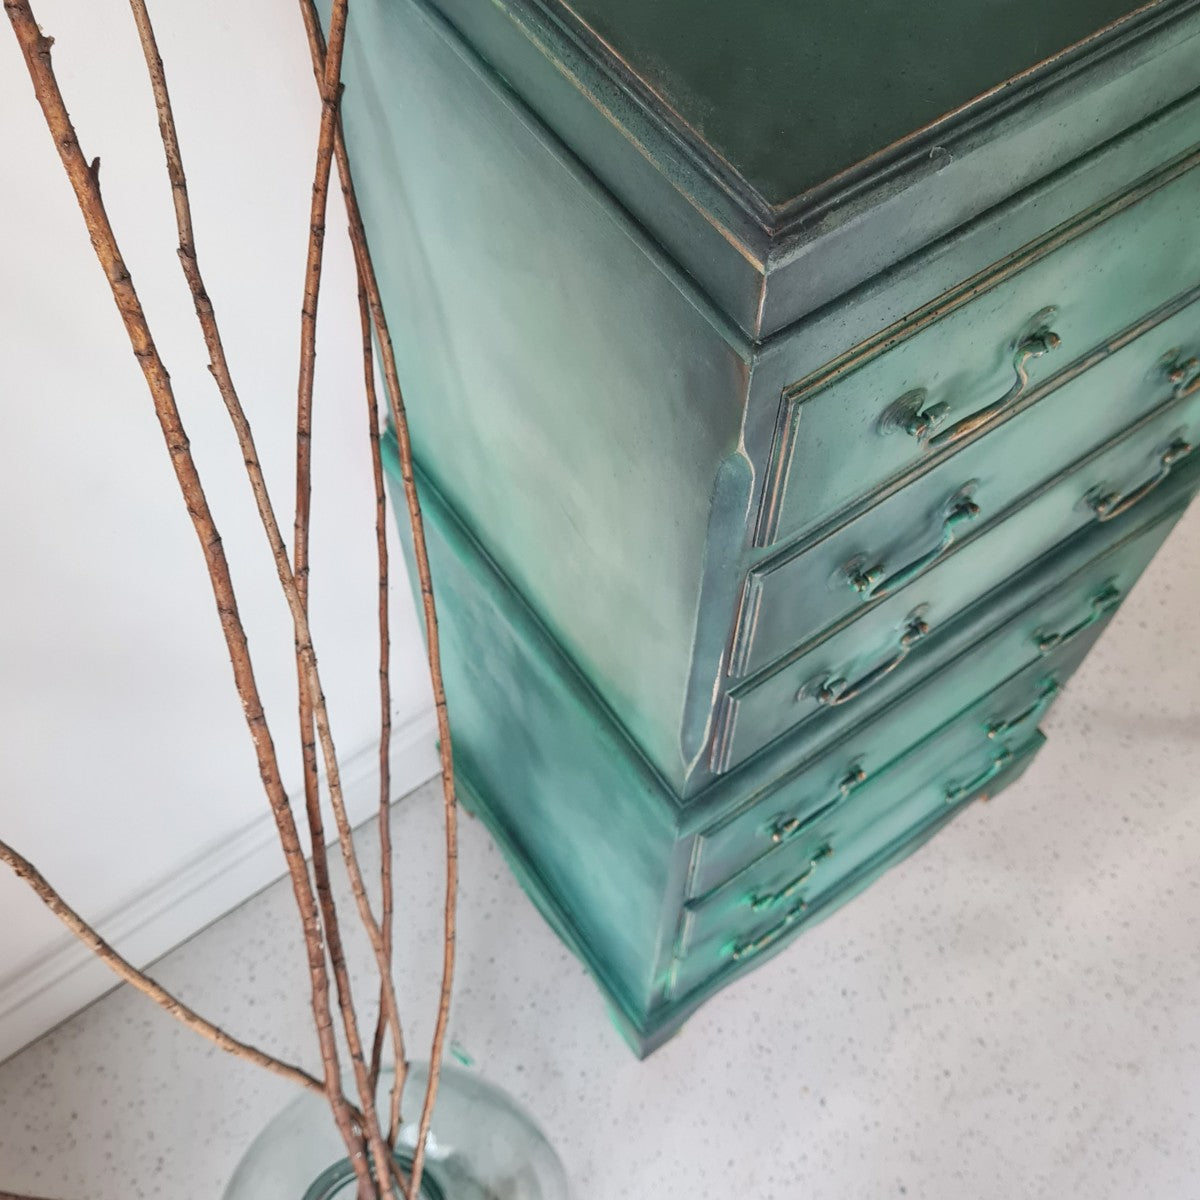 Painterly Green Tall Chest of Drawers by Chloe Kempster